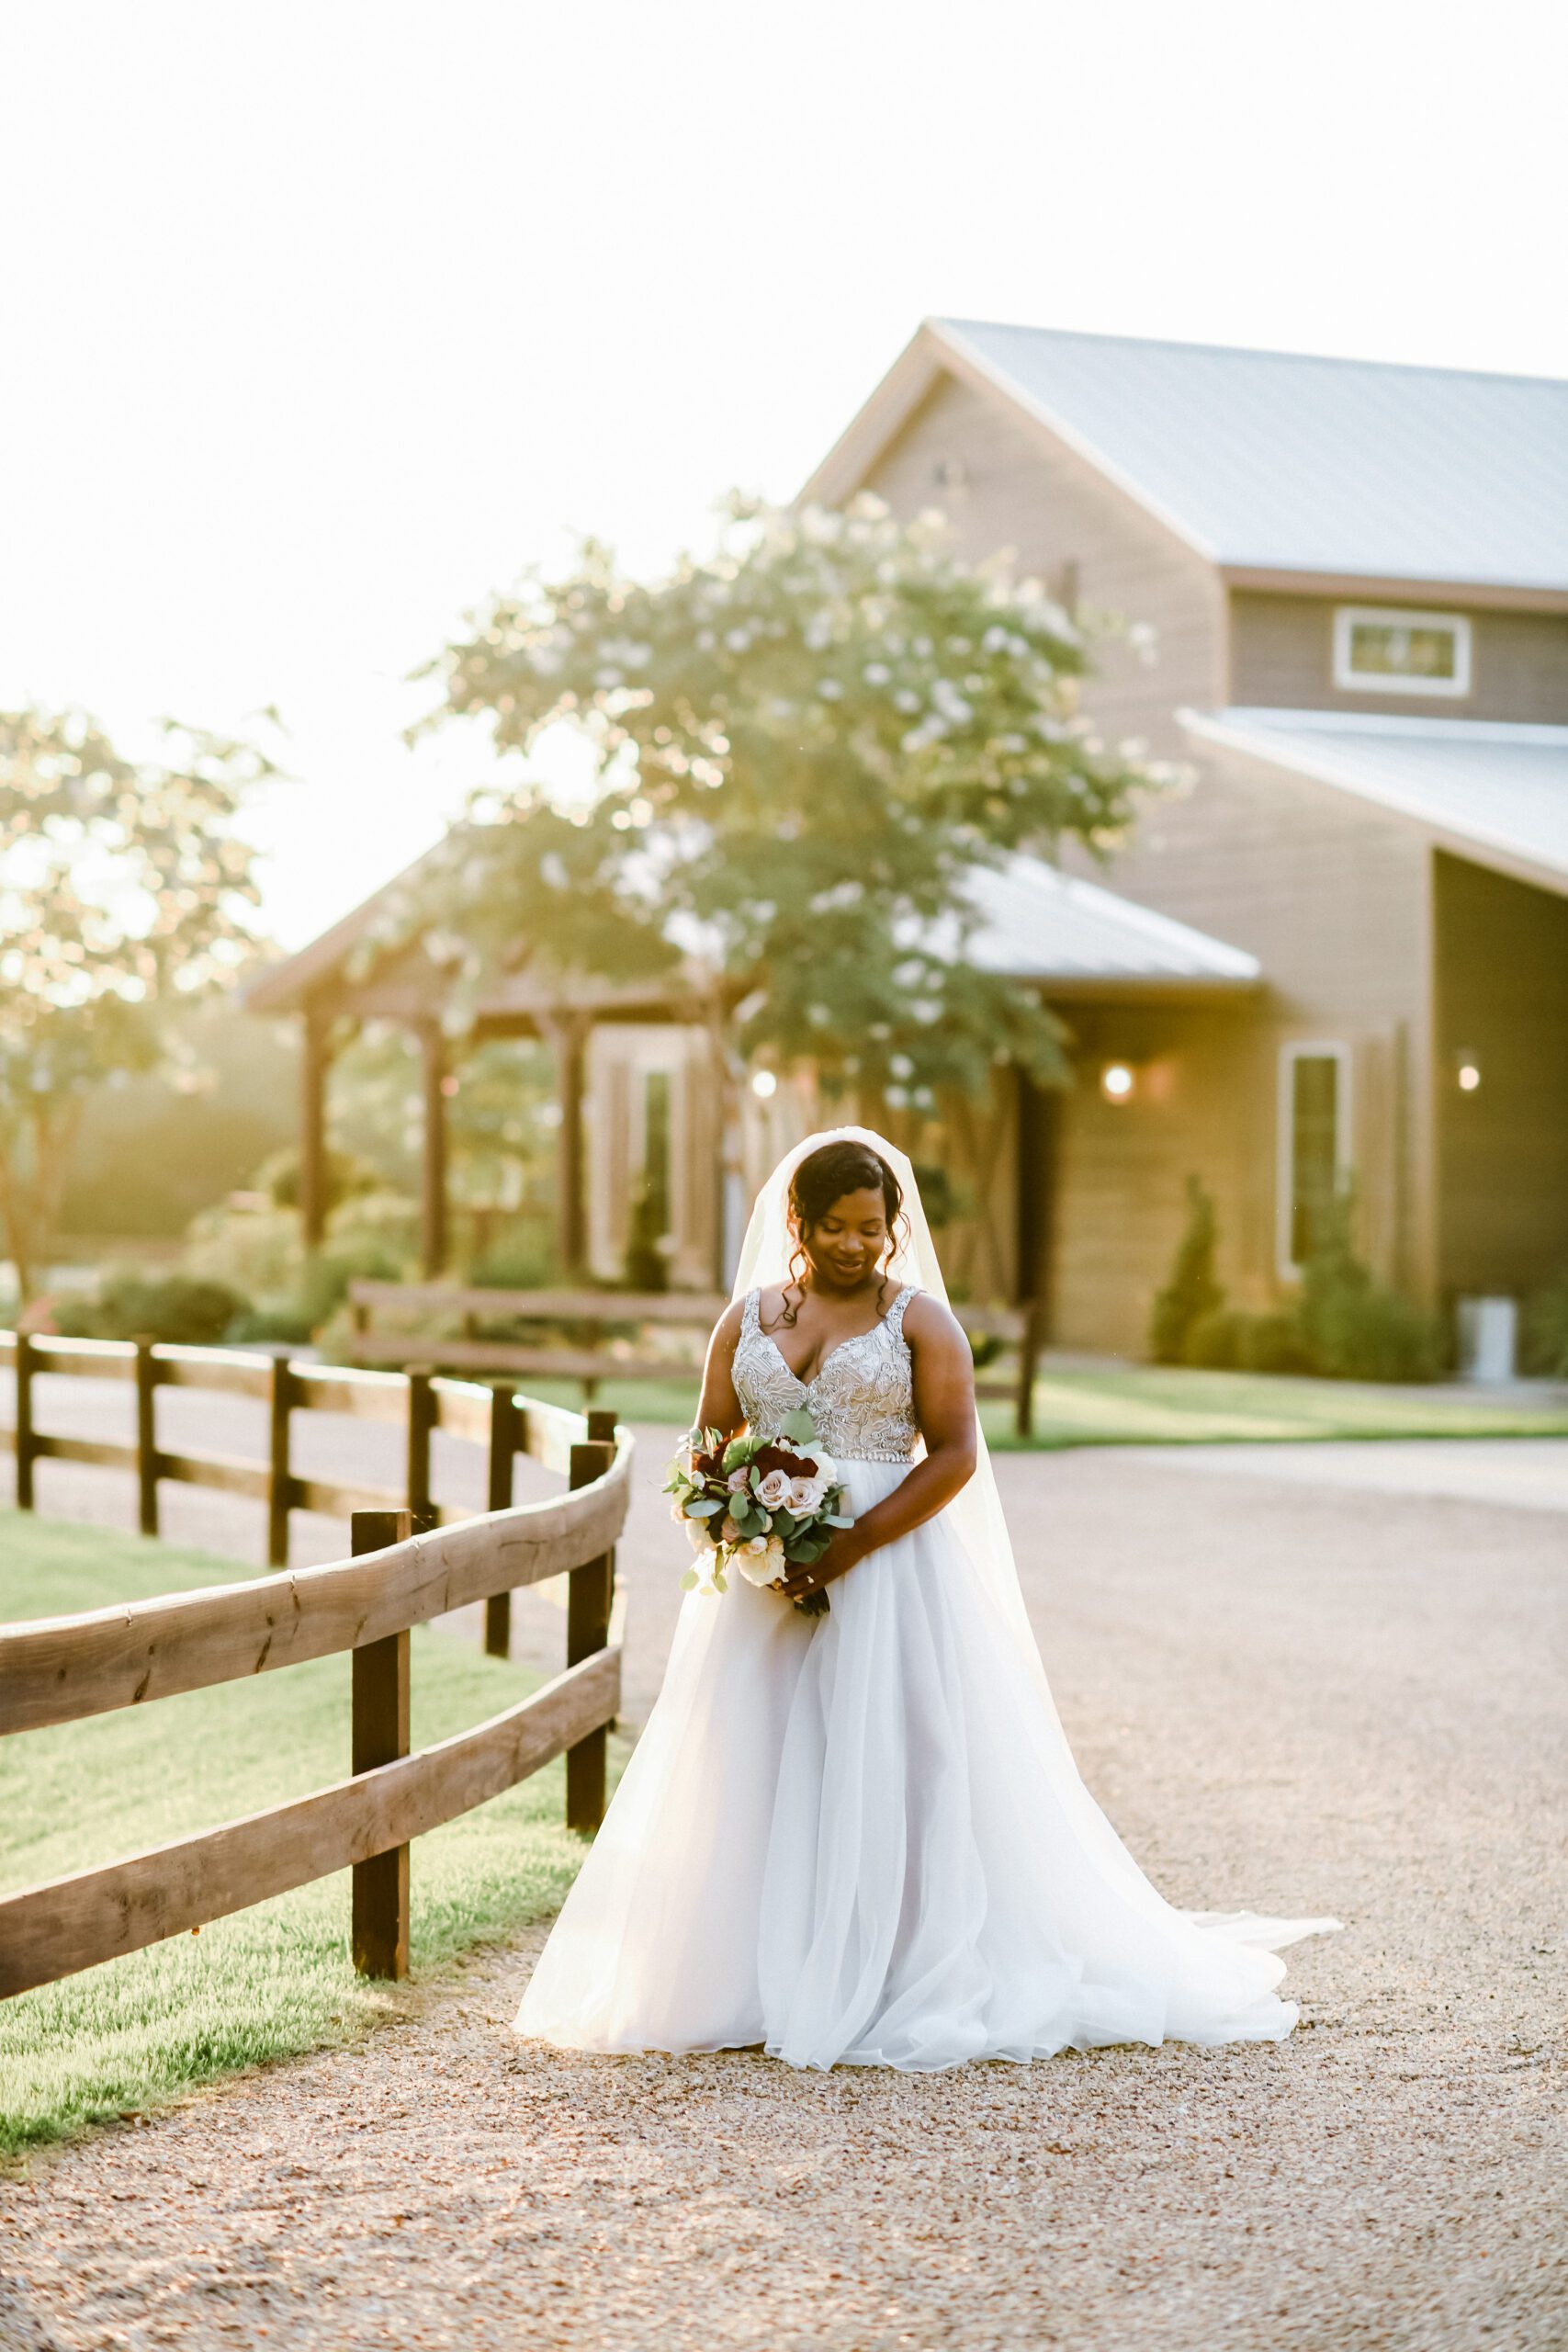 Rosalyn's beautiful summer Bridal Session at Peach Creek Ranch in College Station Texas with Rachel Driskell Photography